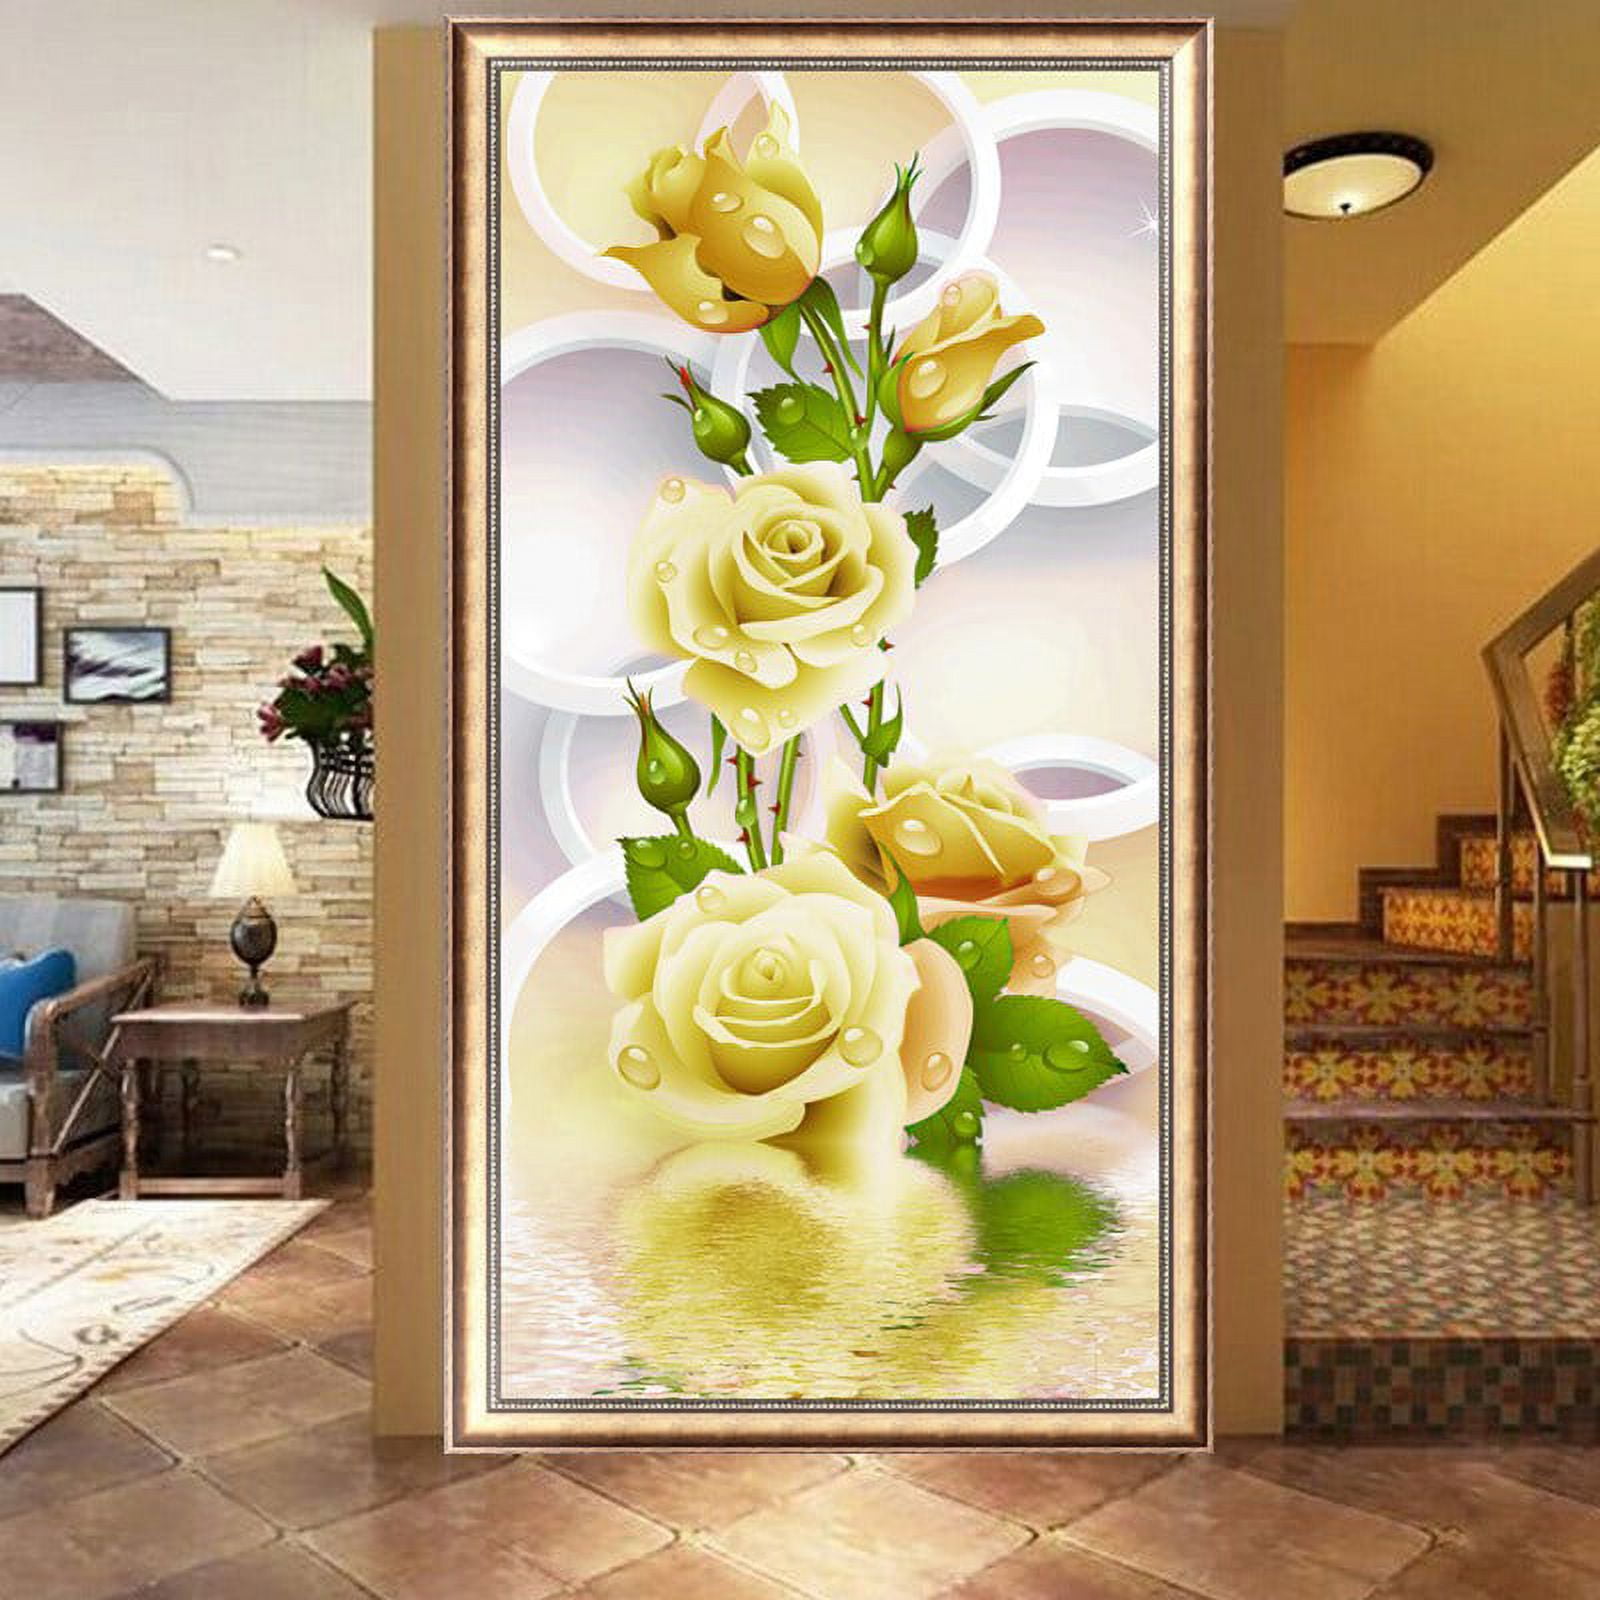 Flowers Diamond Painting Kit for Adults - DIY Home Wall Decor